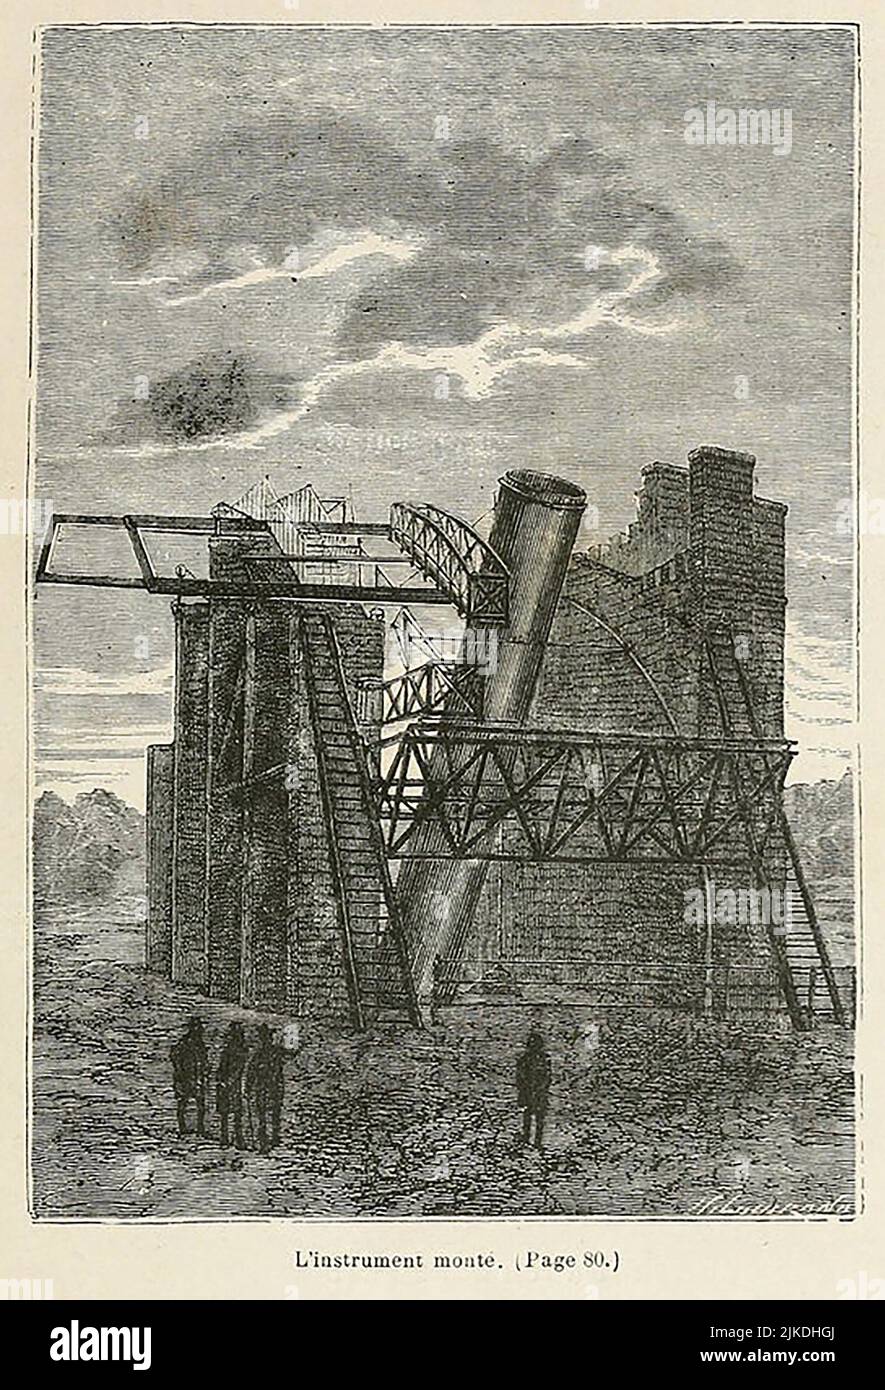 The telescope at Parsontown - From the Earth to the Moon - Jules Verne. Ilustration by Émile-Antoine Bayard. Stock Photo